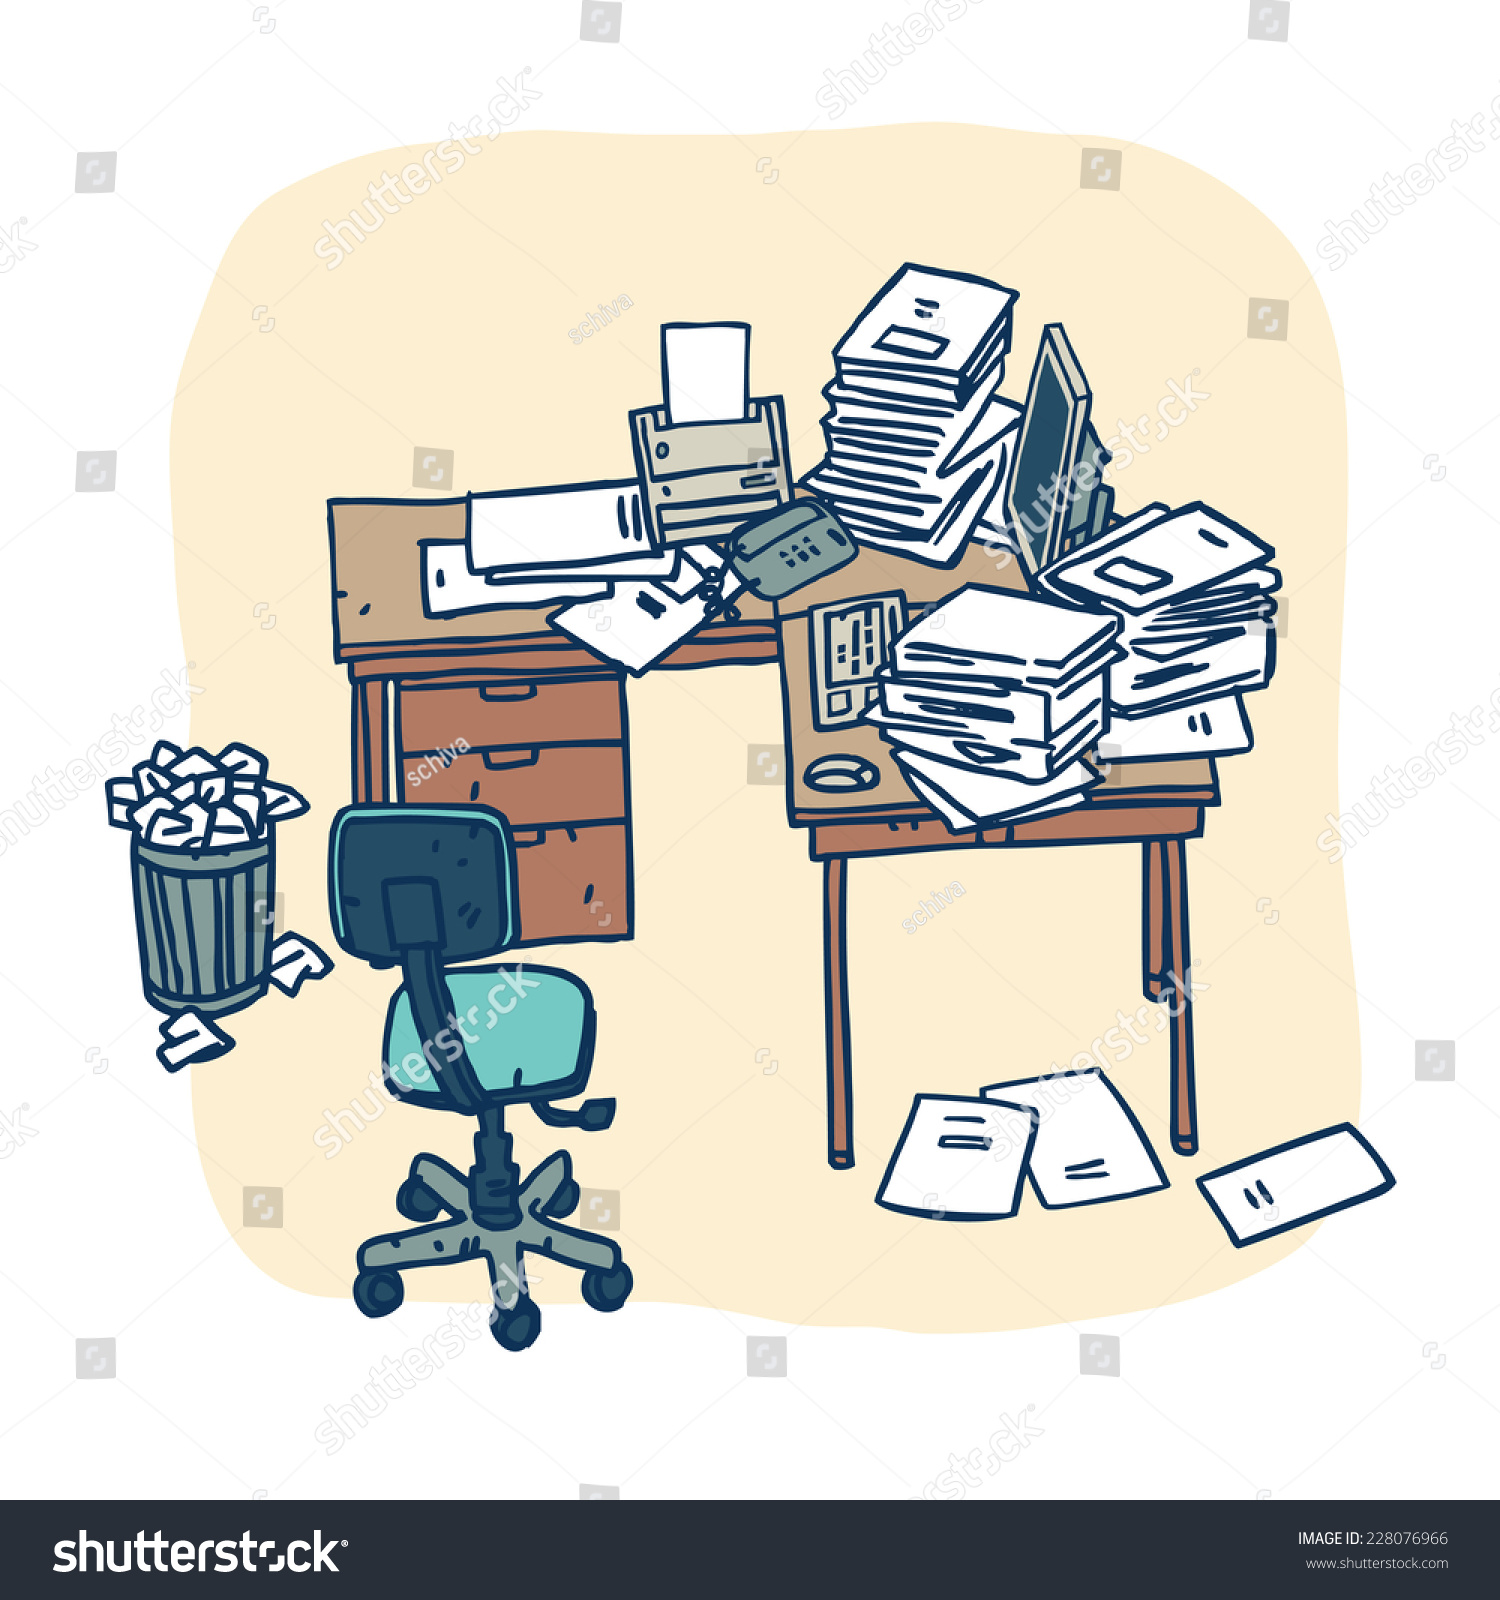 Flat Style Cartoon Design Concept Of Creative Office Workspace. Office ...